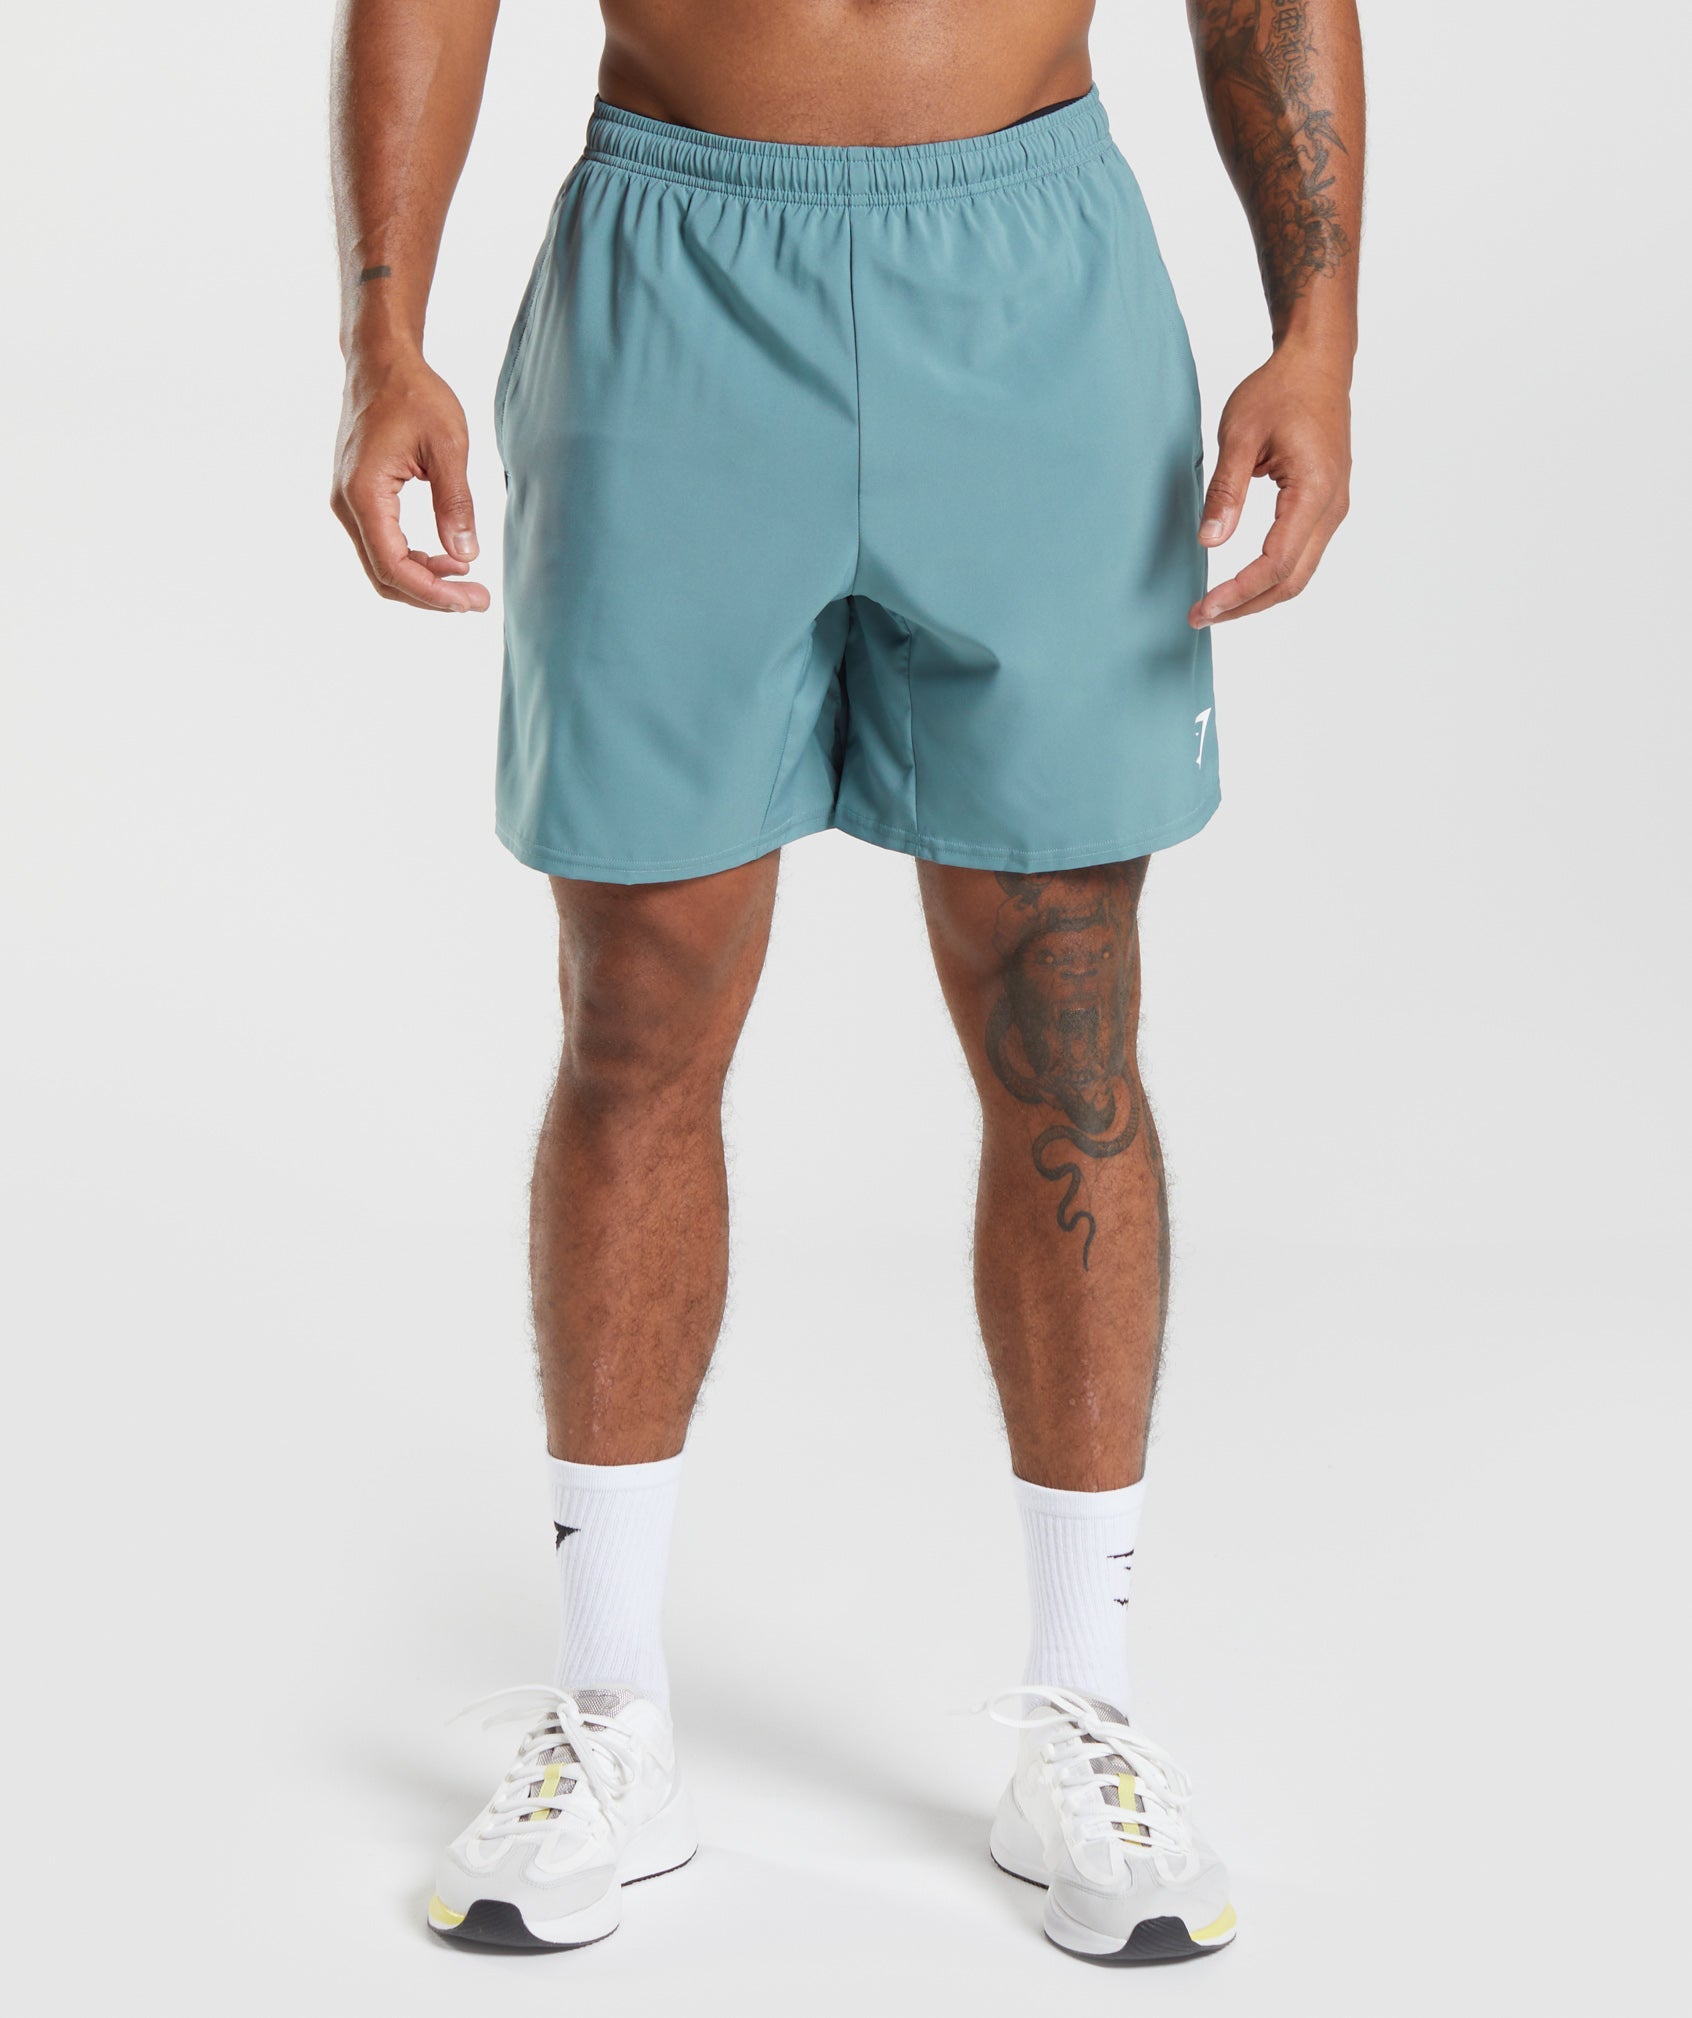 Arrival Shorts in Thunder Blue